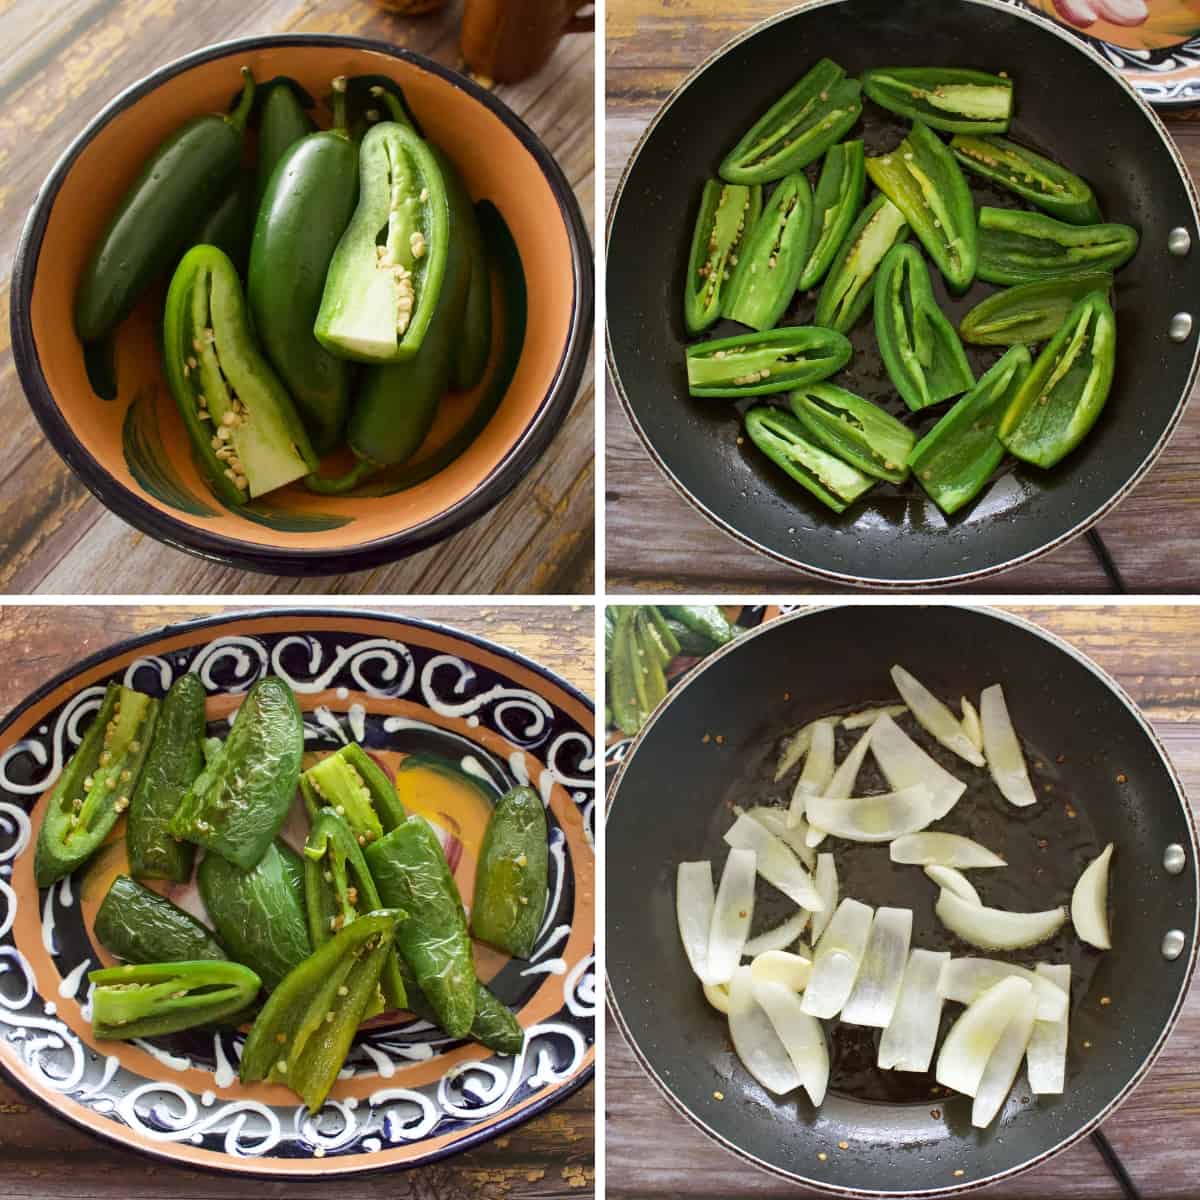 Cooking jalapenos and other ingredients in a large skillet.